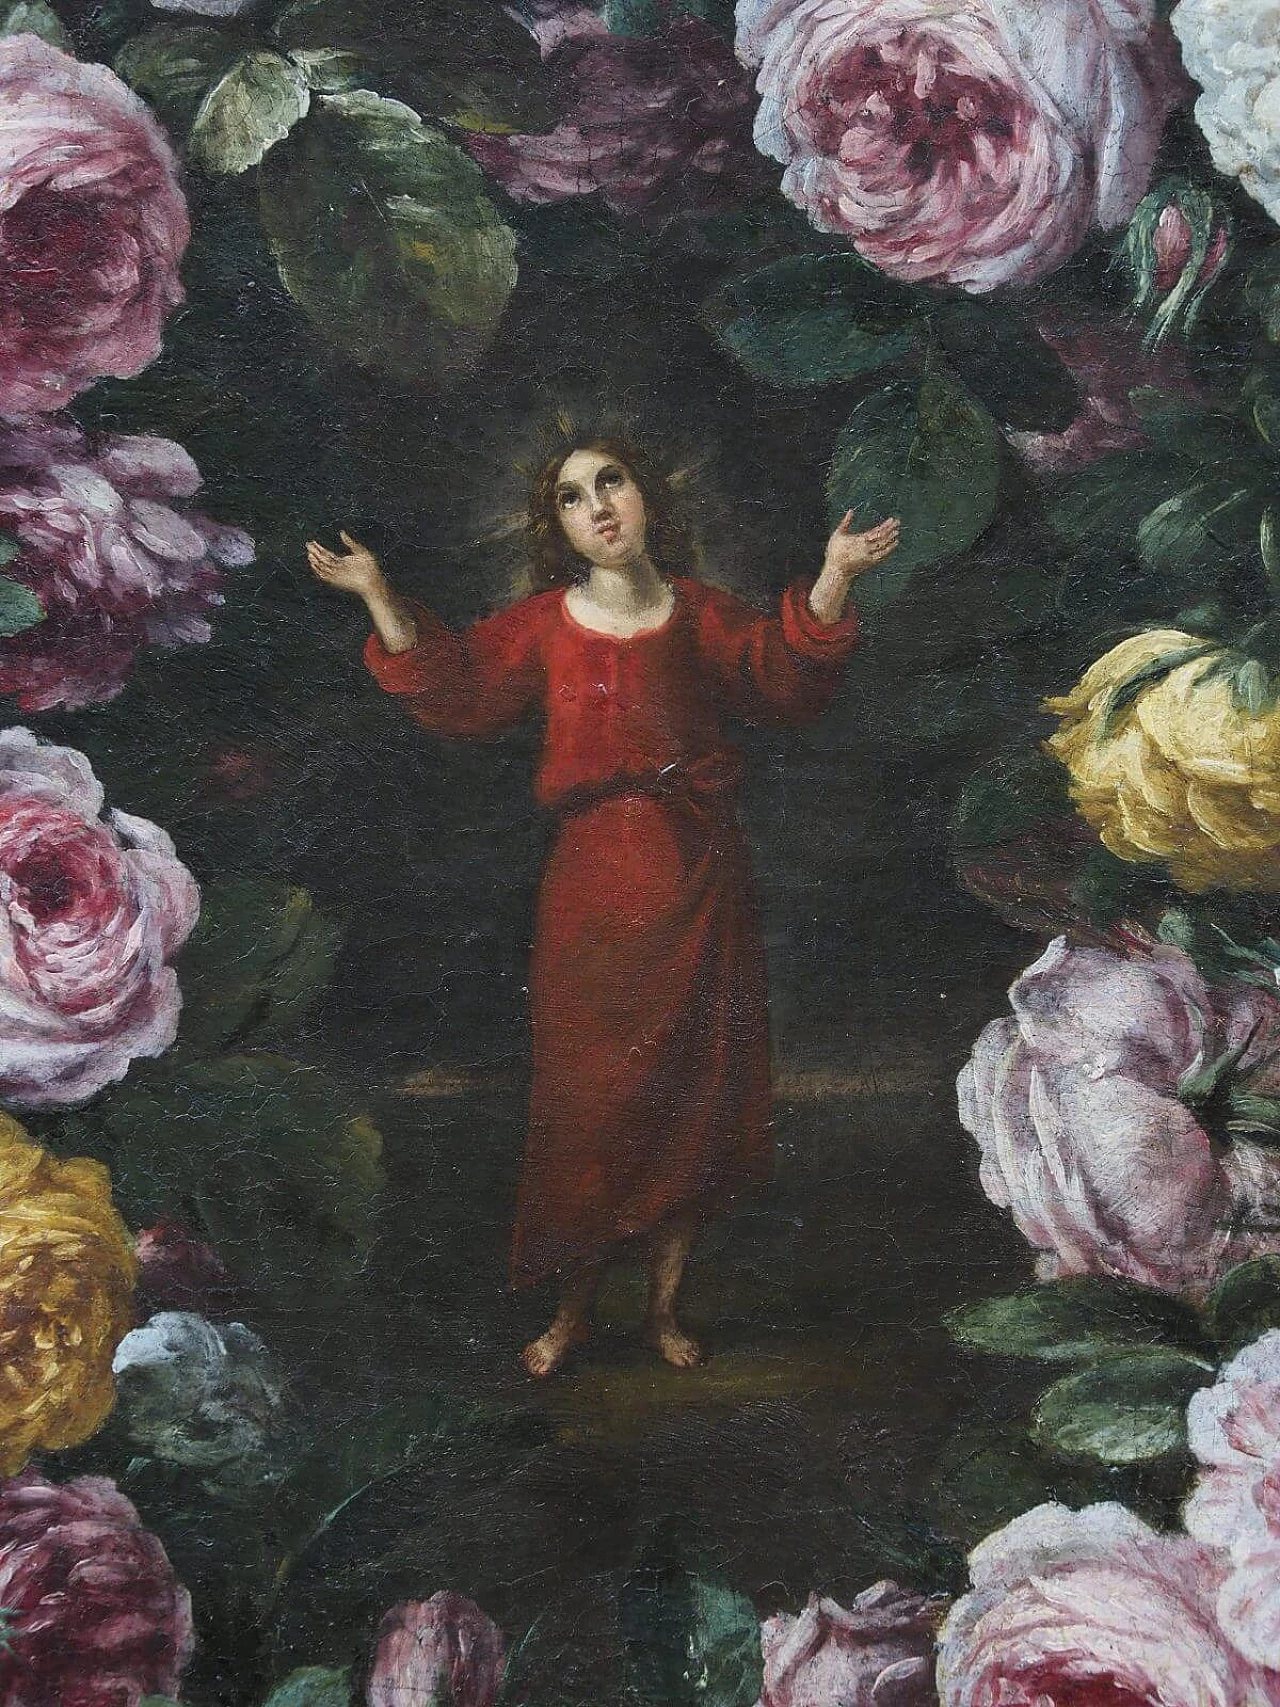 Flower garland with Young Jesus, oil painting on canvas attributed to Pier Francesco Cittadini, 17th century 10